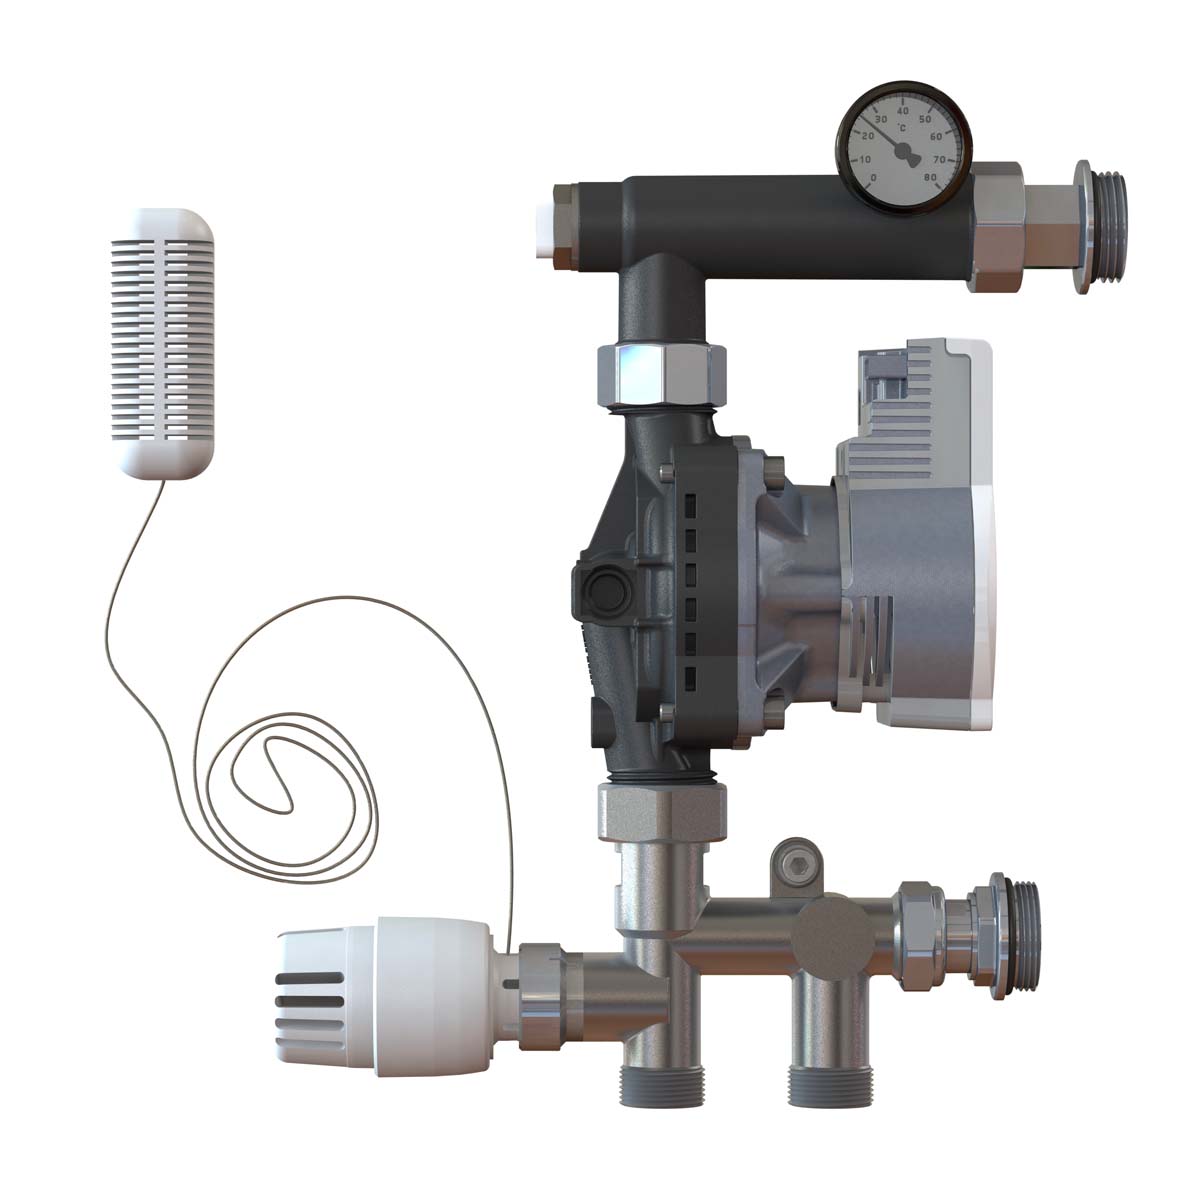 Featured image for “Mixing valve FS 65 with room thermostat”